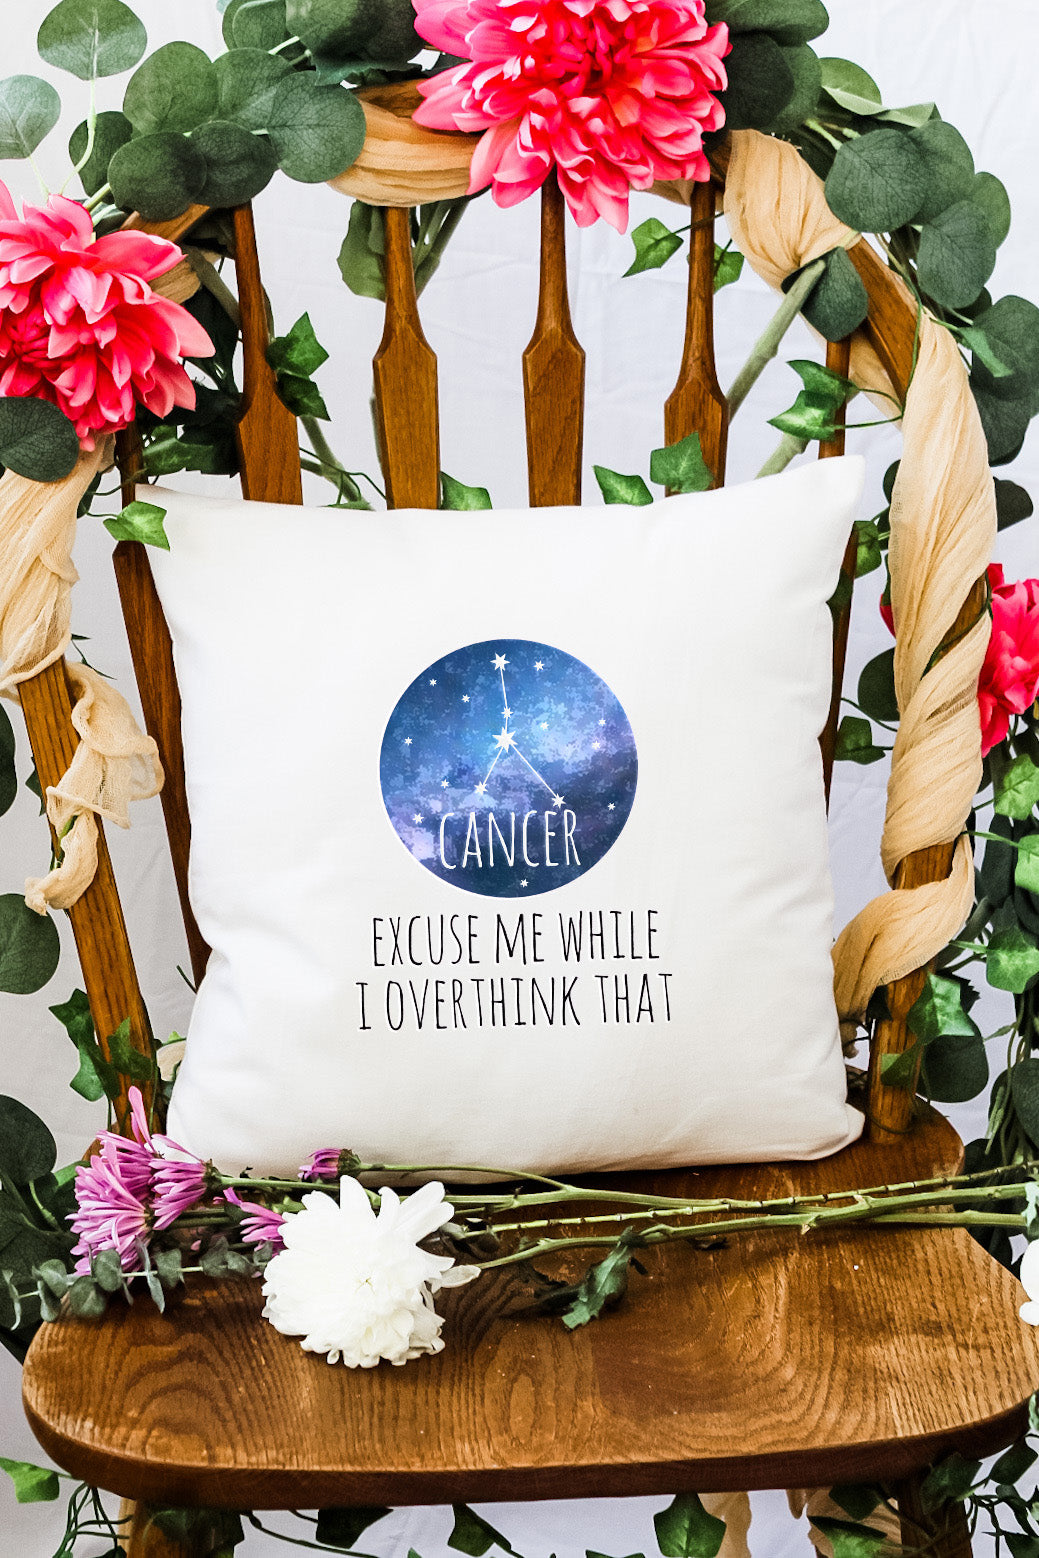 Cancer (Excuse Me While I Overthink That) - Decorative Throw Pillow - MoonlightMakers